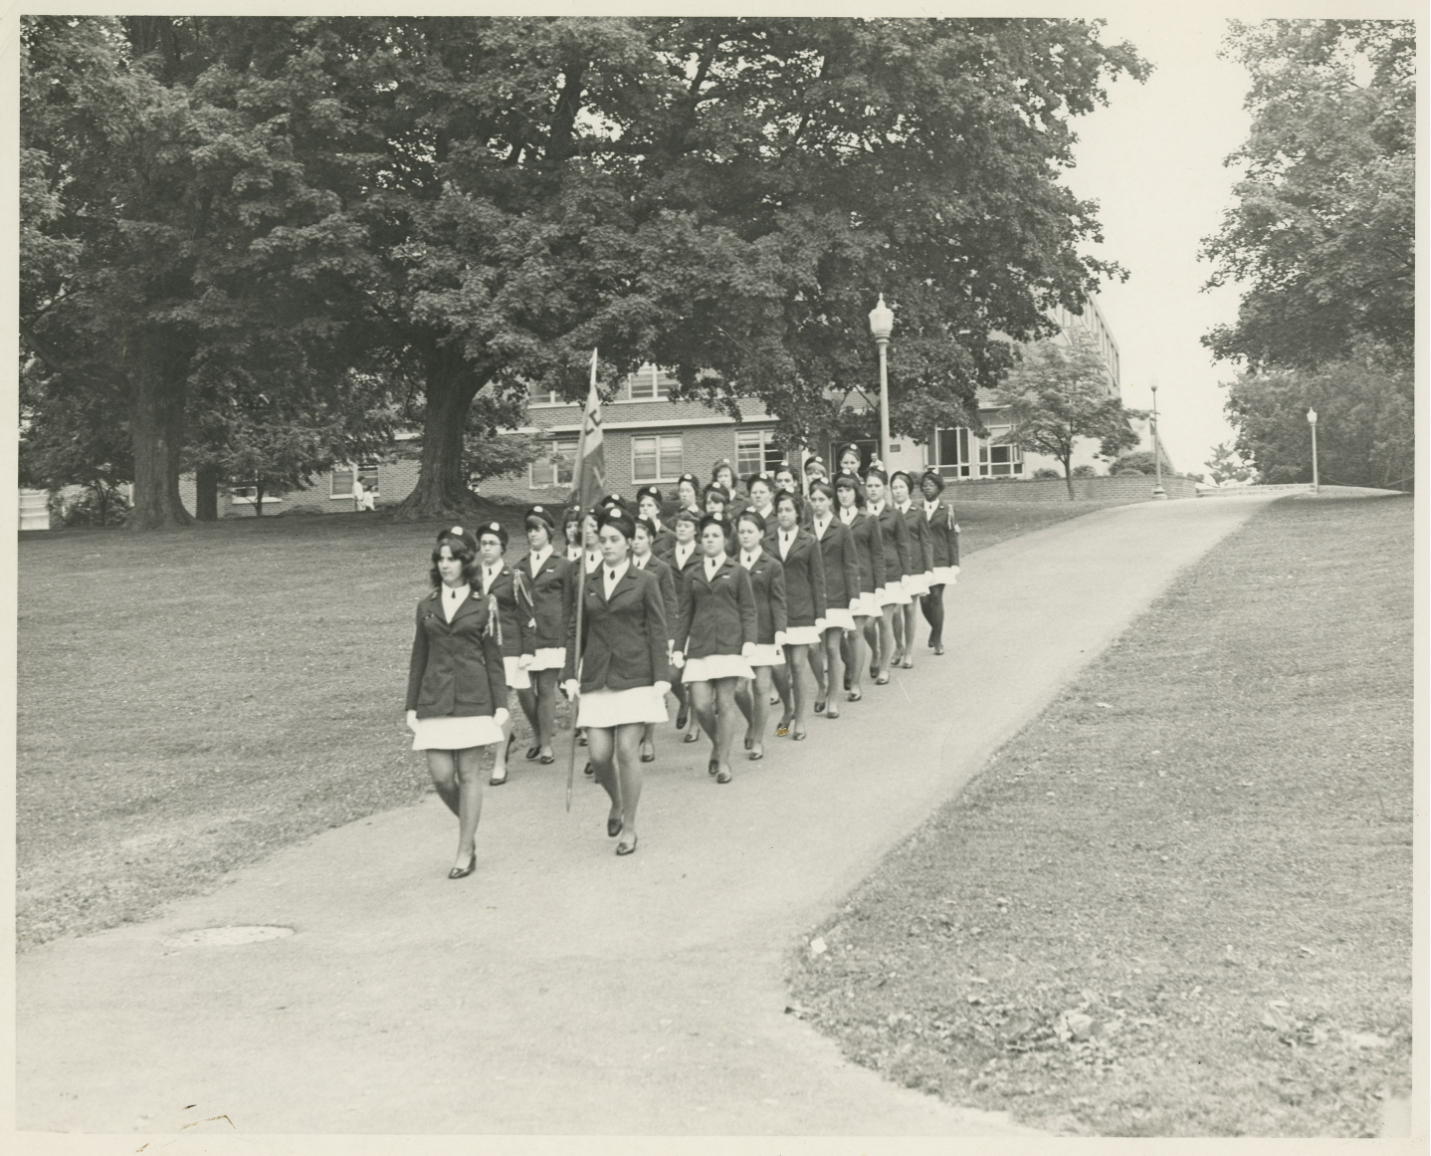 Women cadets in L Squadron marching on campus